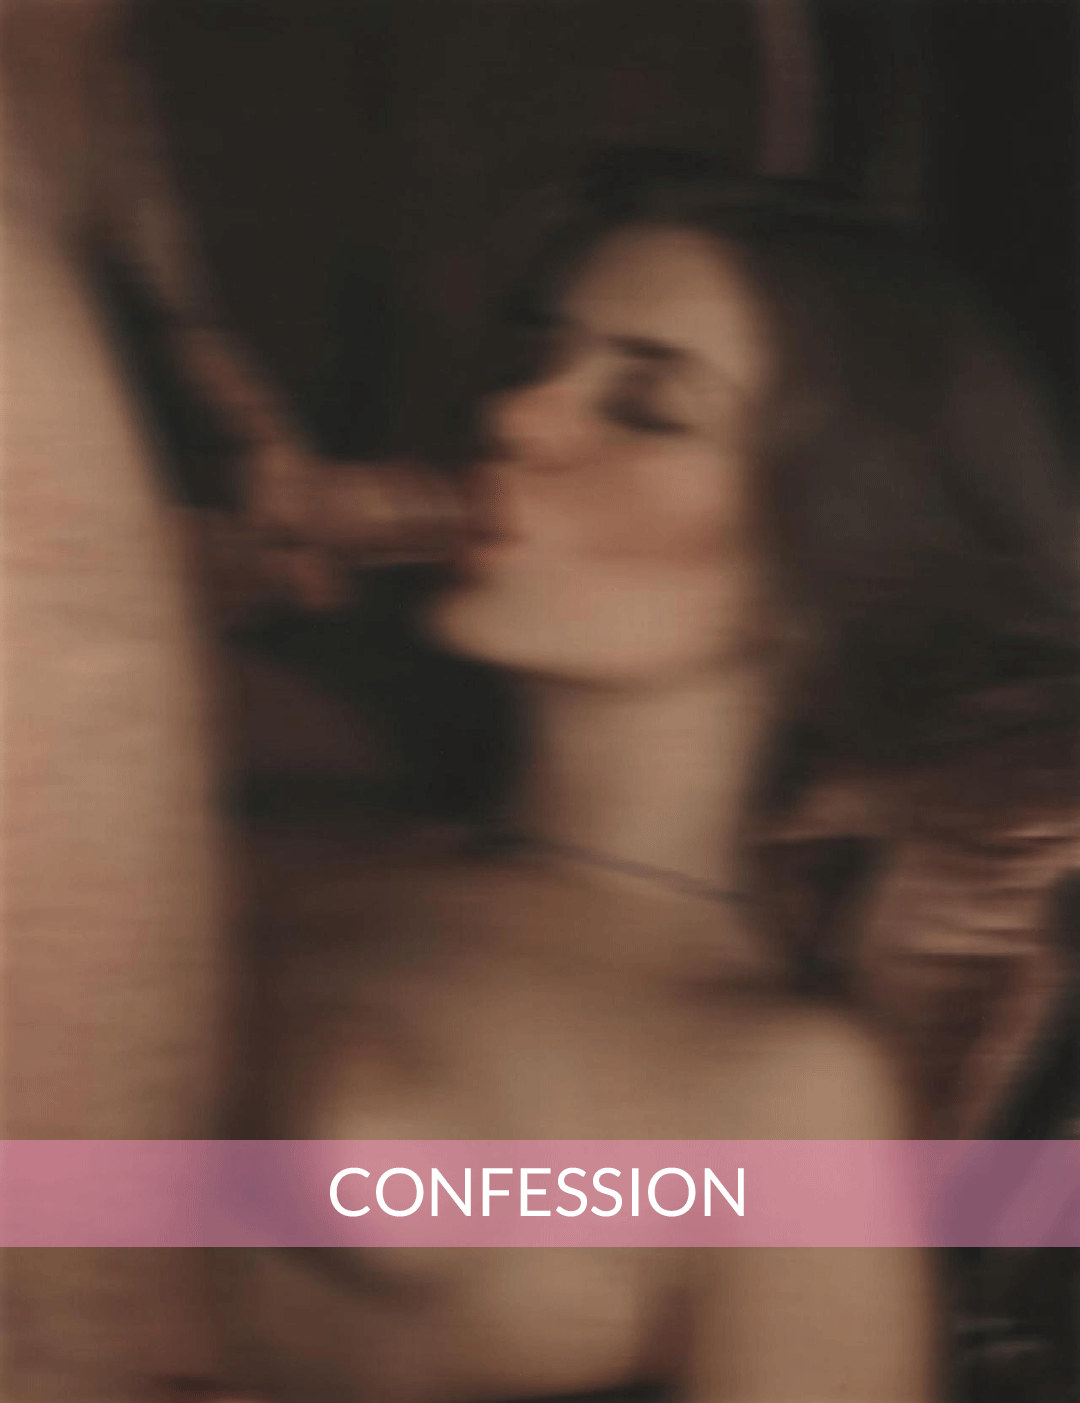 Ellie K Solo Porn - My confession by Ellie a real life sex story and naughty confession